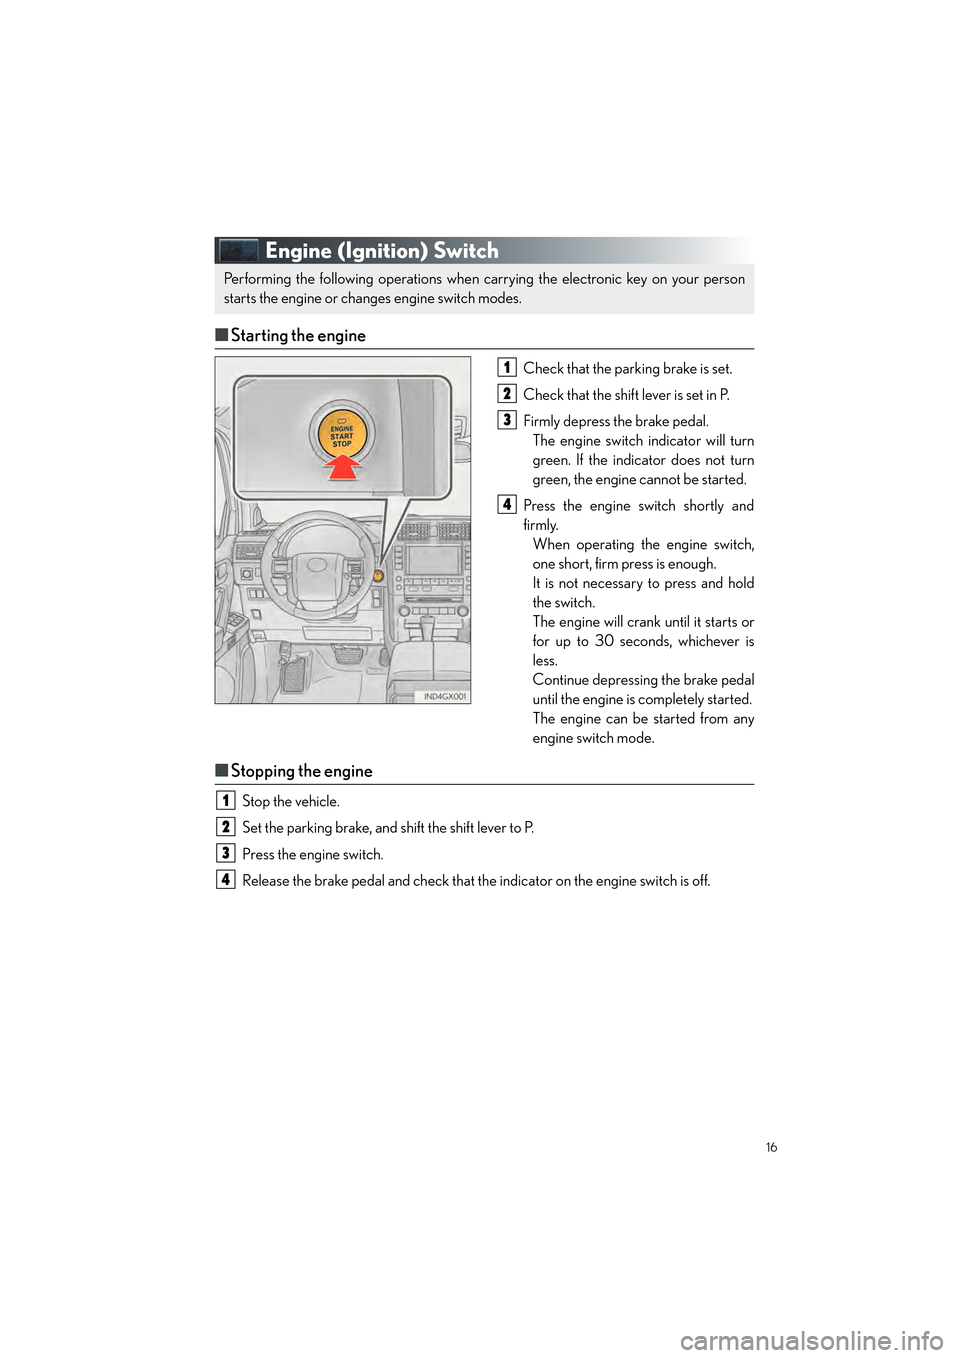 Lexus GX460 2017  Quick Guide 16
GX460_QG_OM60P00U_(U)
Engine (Ignition) Switch
■Starting the engine
Check that the parking brake is set.
Check that the shift lever is set in P.
Firmly depress the brake pedal.
The engine switch 